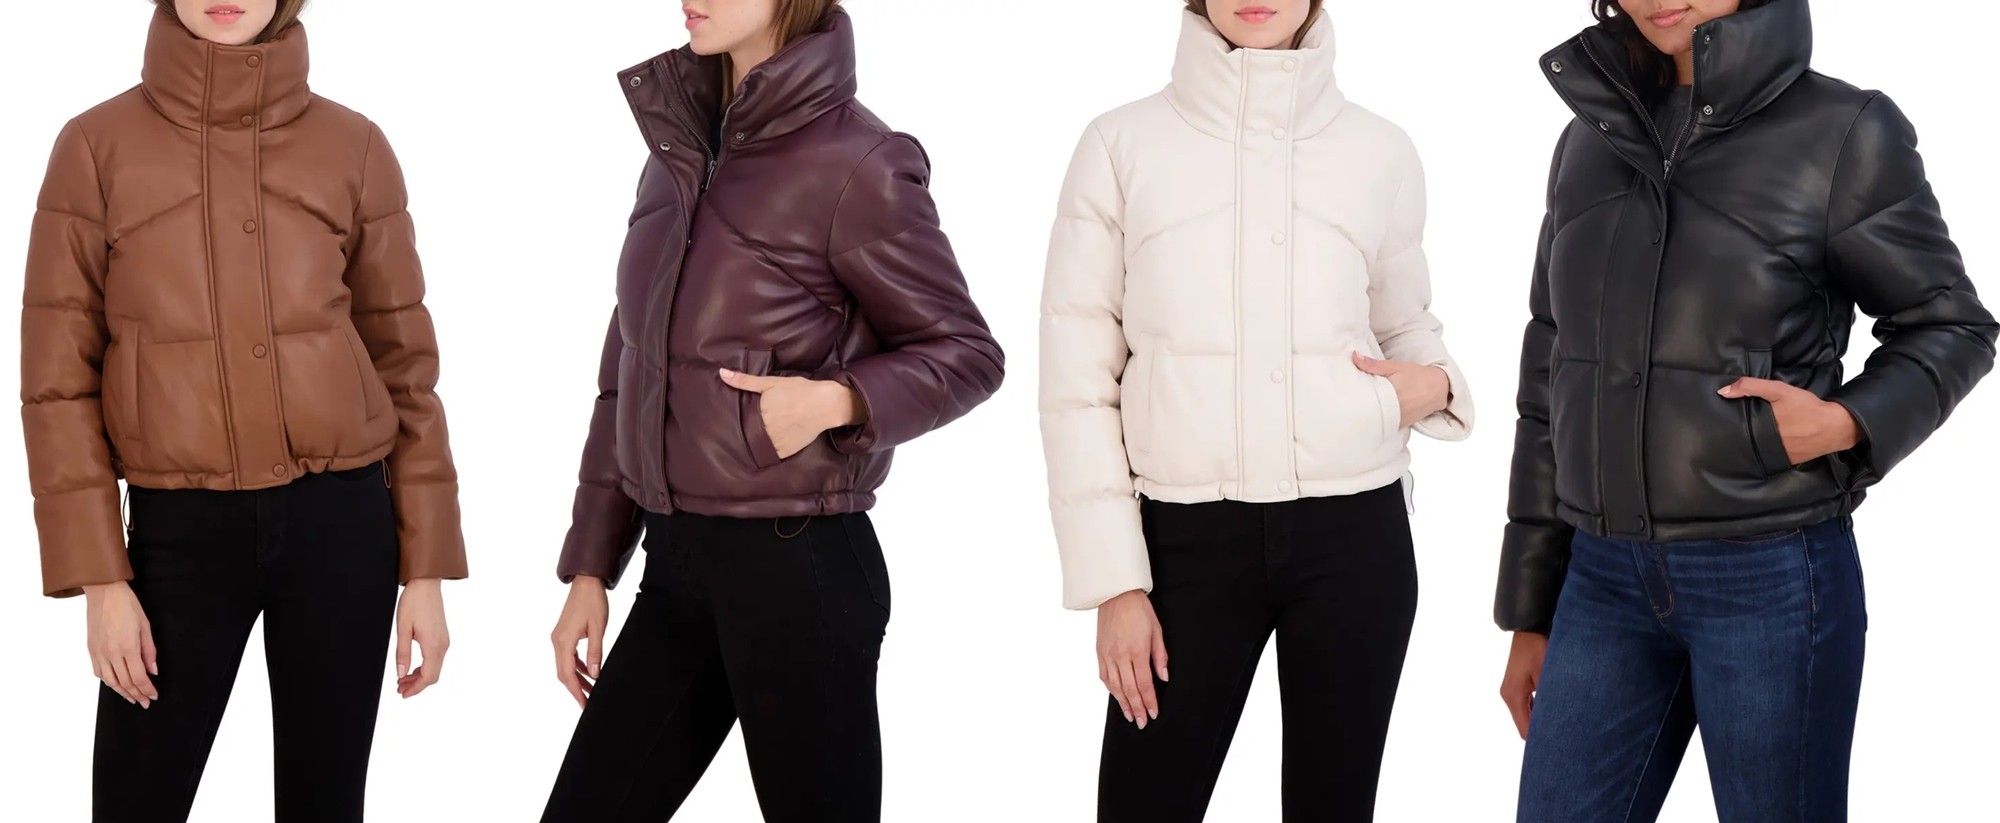 These Sebby Jackets Keep You Warm & Make Great Holiday Gifts